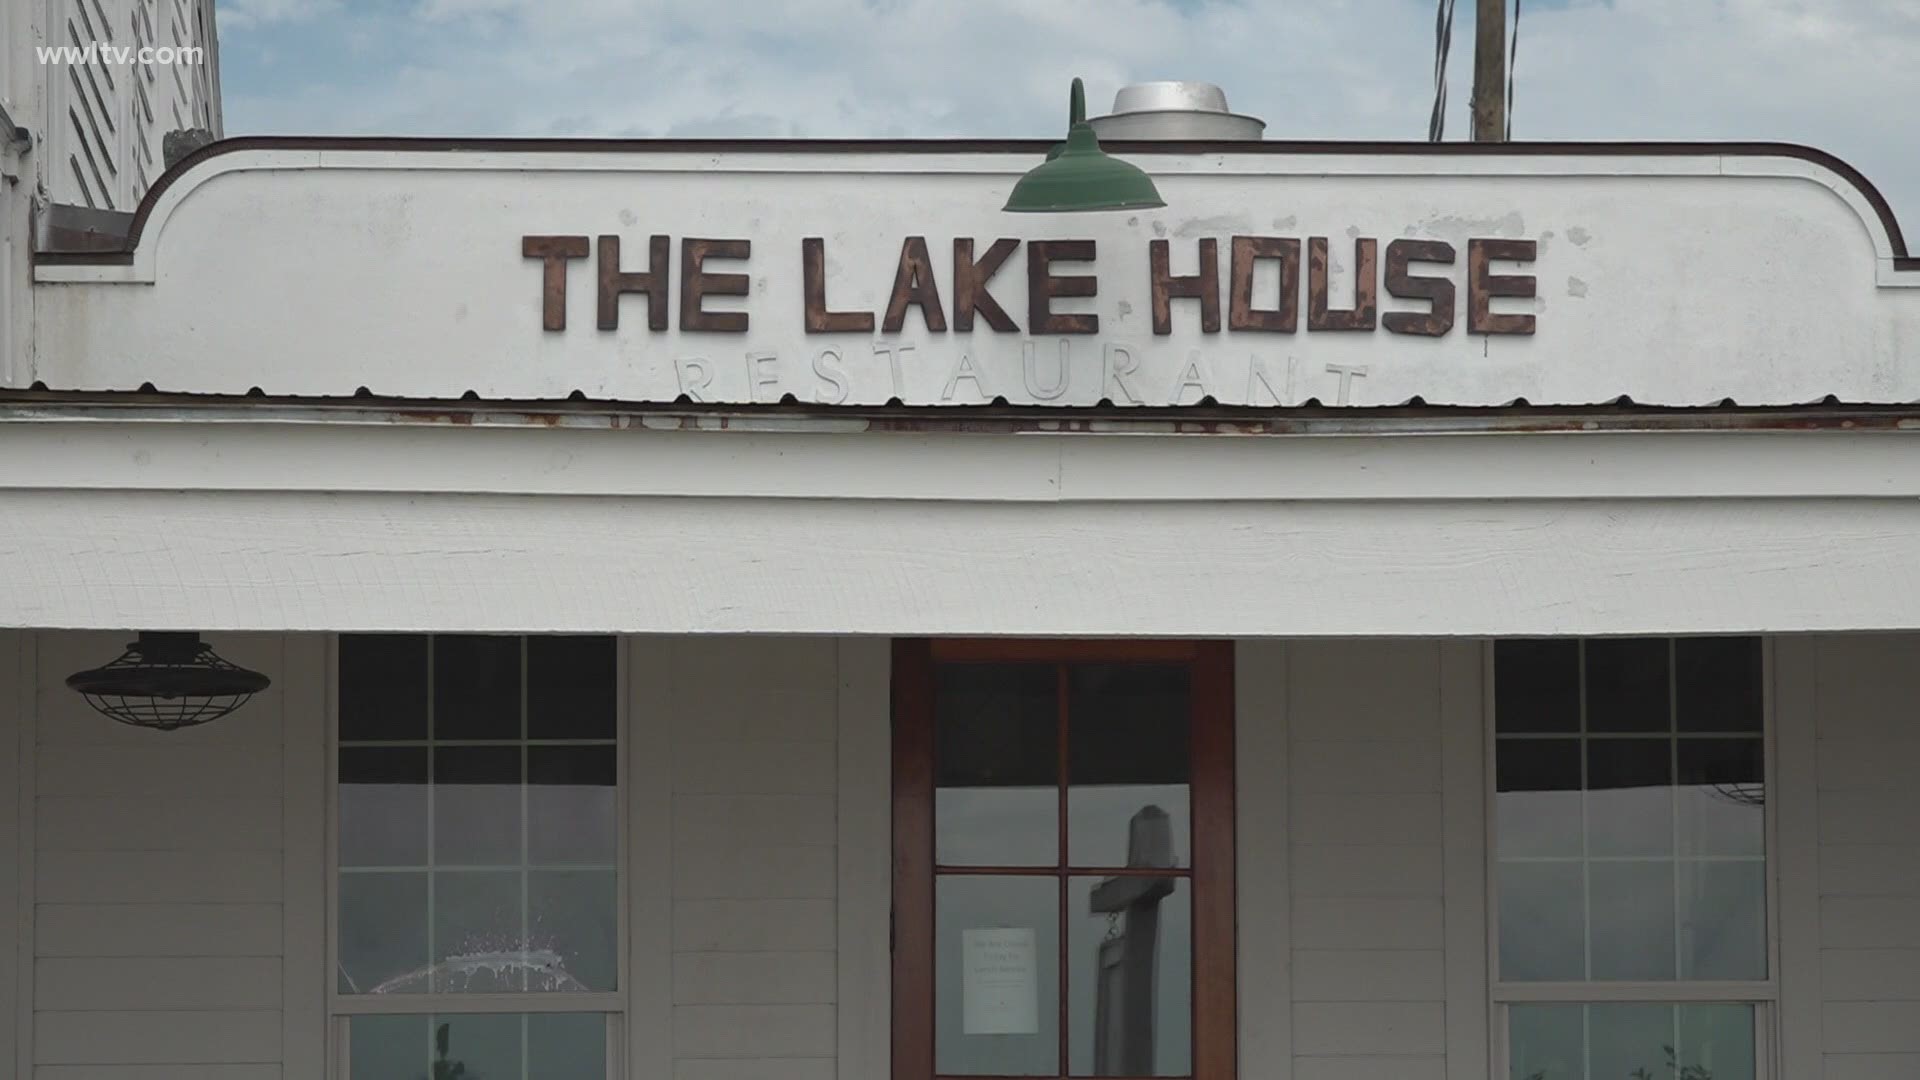 The Lakehouse restaurant on Mandeville's lakefront has flooded a couple of times this year already and now they're worried it may happen again.